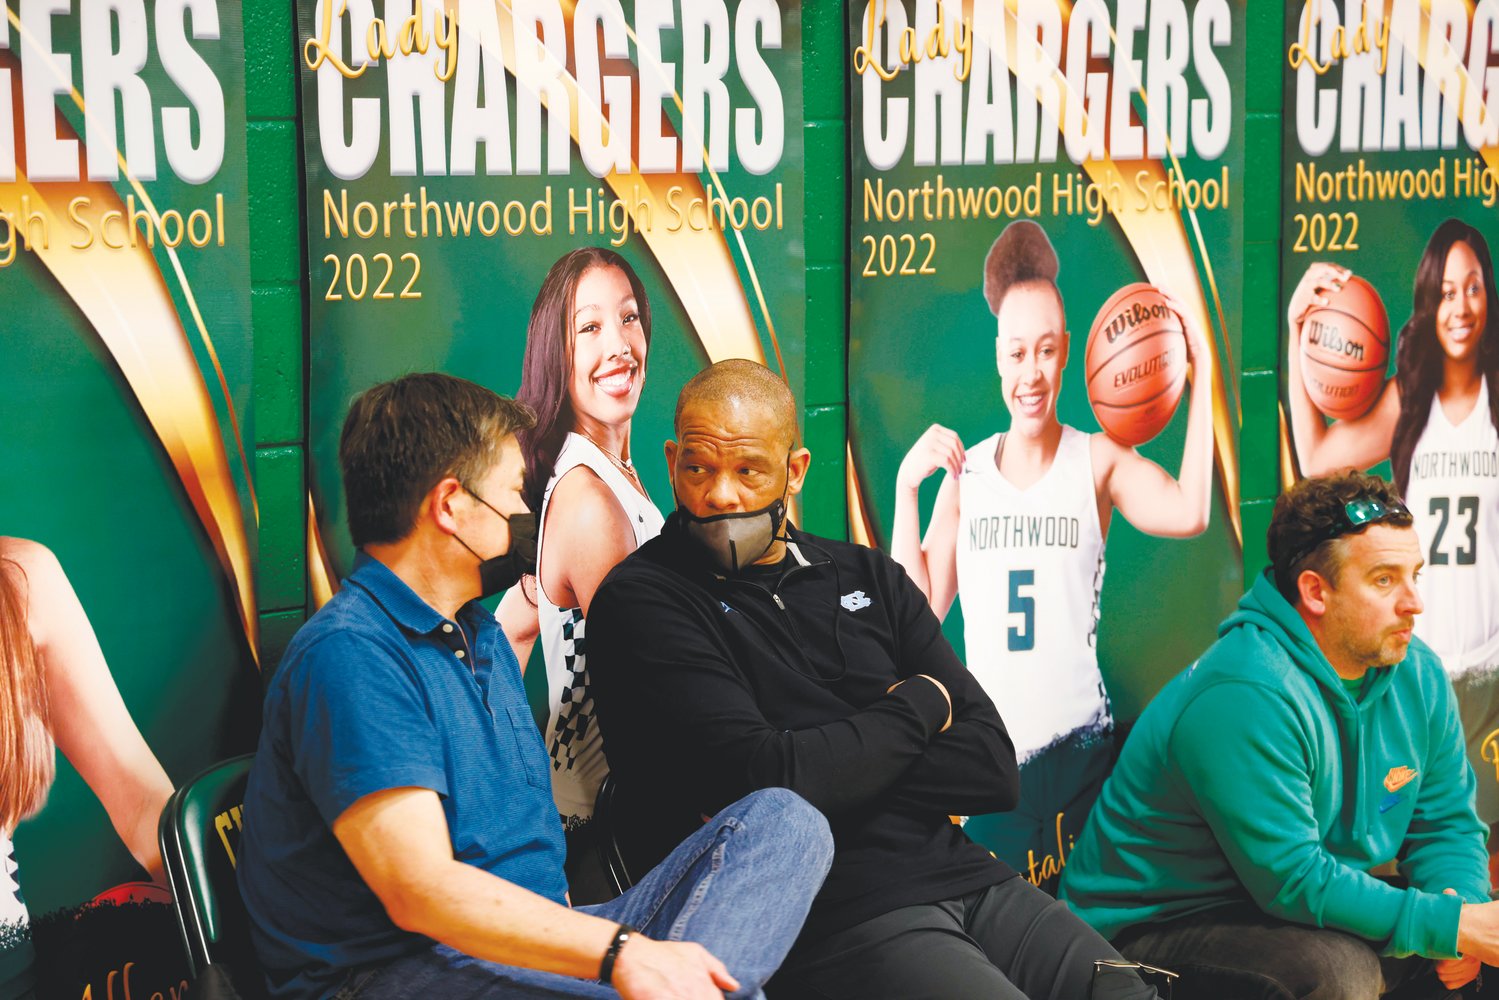 UNC Tar Heels head men's basketball coach Hubert Davis (in black) chats during halftime of the Northwood men's basketball game last Thursday, where he was likely in attendance to watch Chargers sophomore Drake Powell. The Chargers defeated the West Brunswick Trojans in the 2nd round of the NCHSAA 3A playoffs, 80-40.